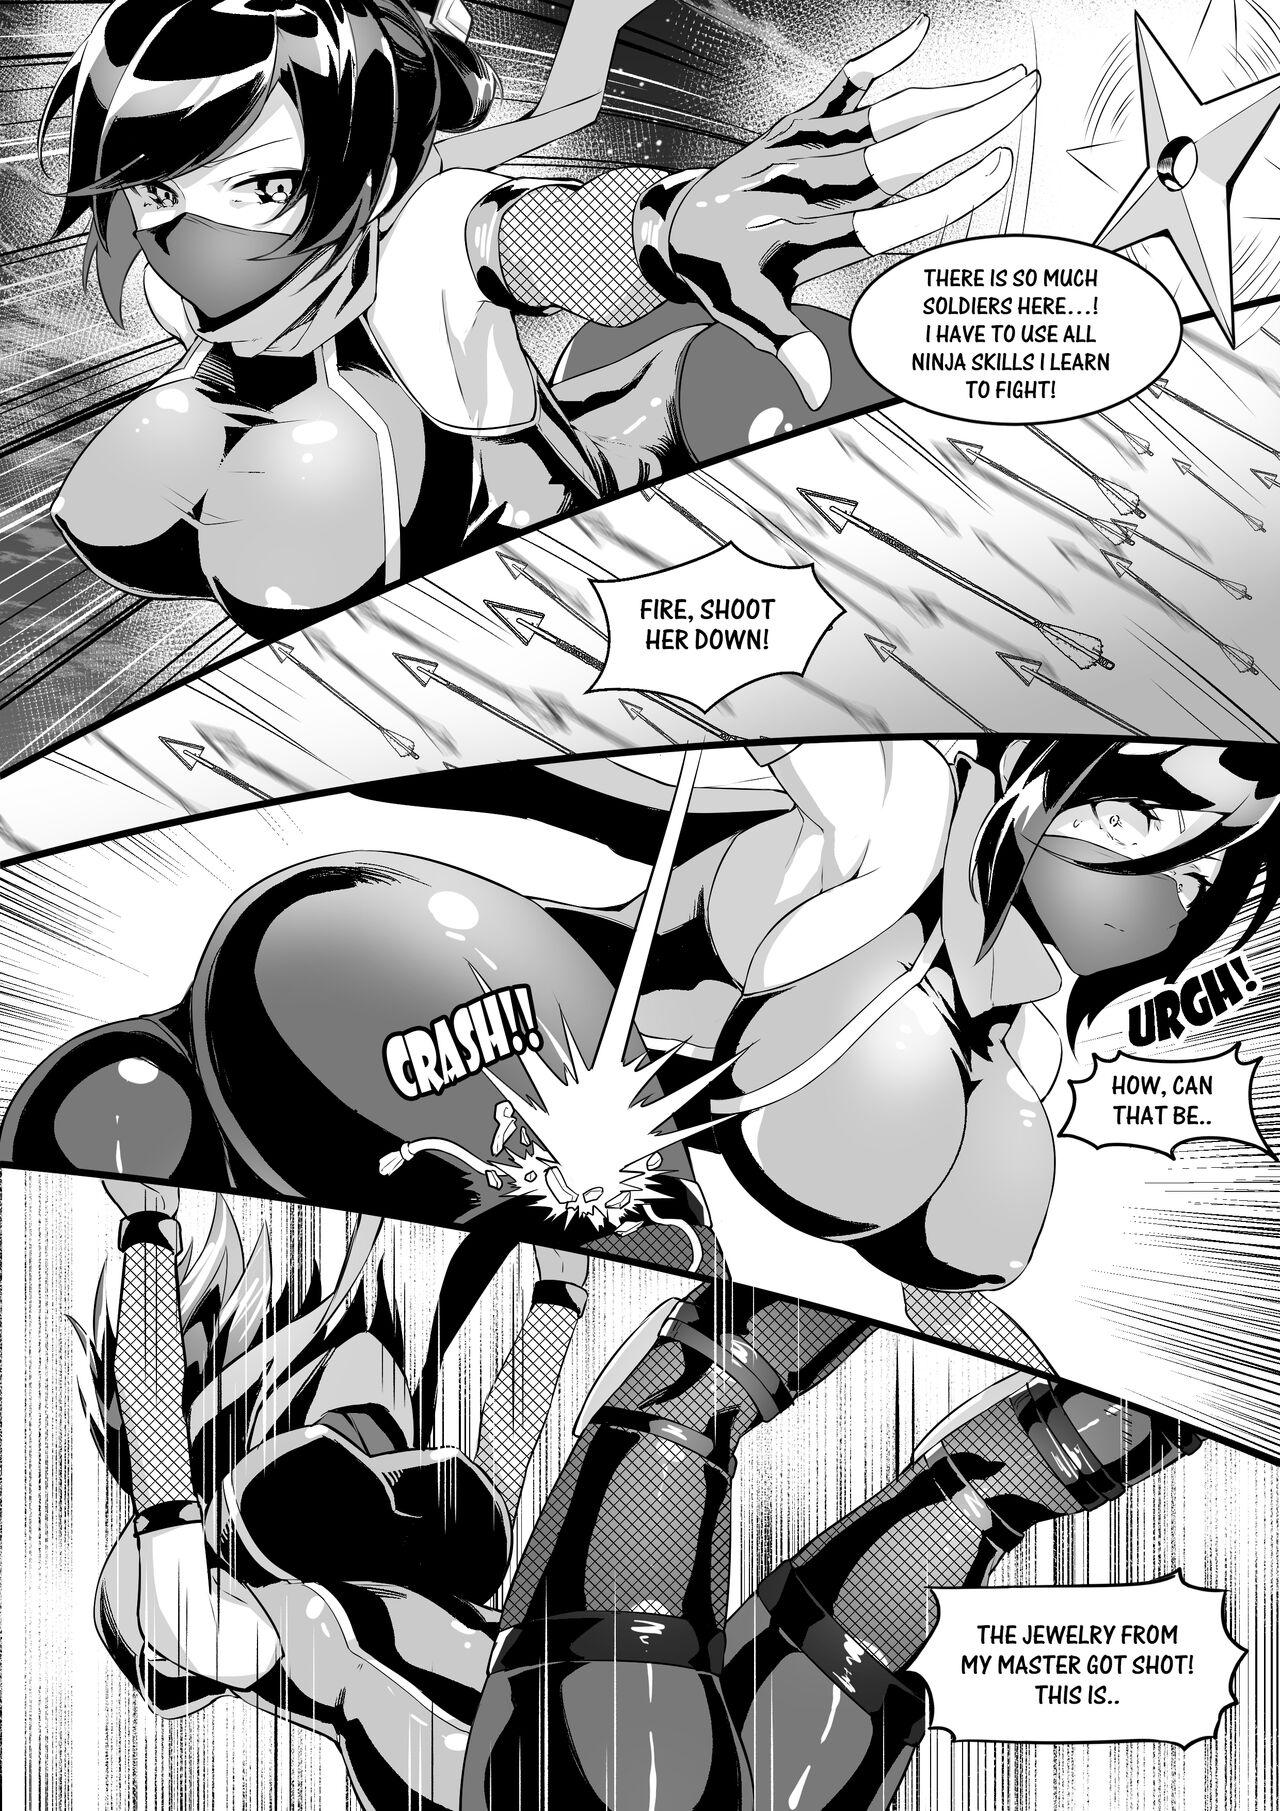 From Giant Shadow Looming Over Stealth in Eastern Style - Original Bra - Page 4